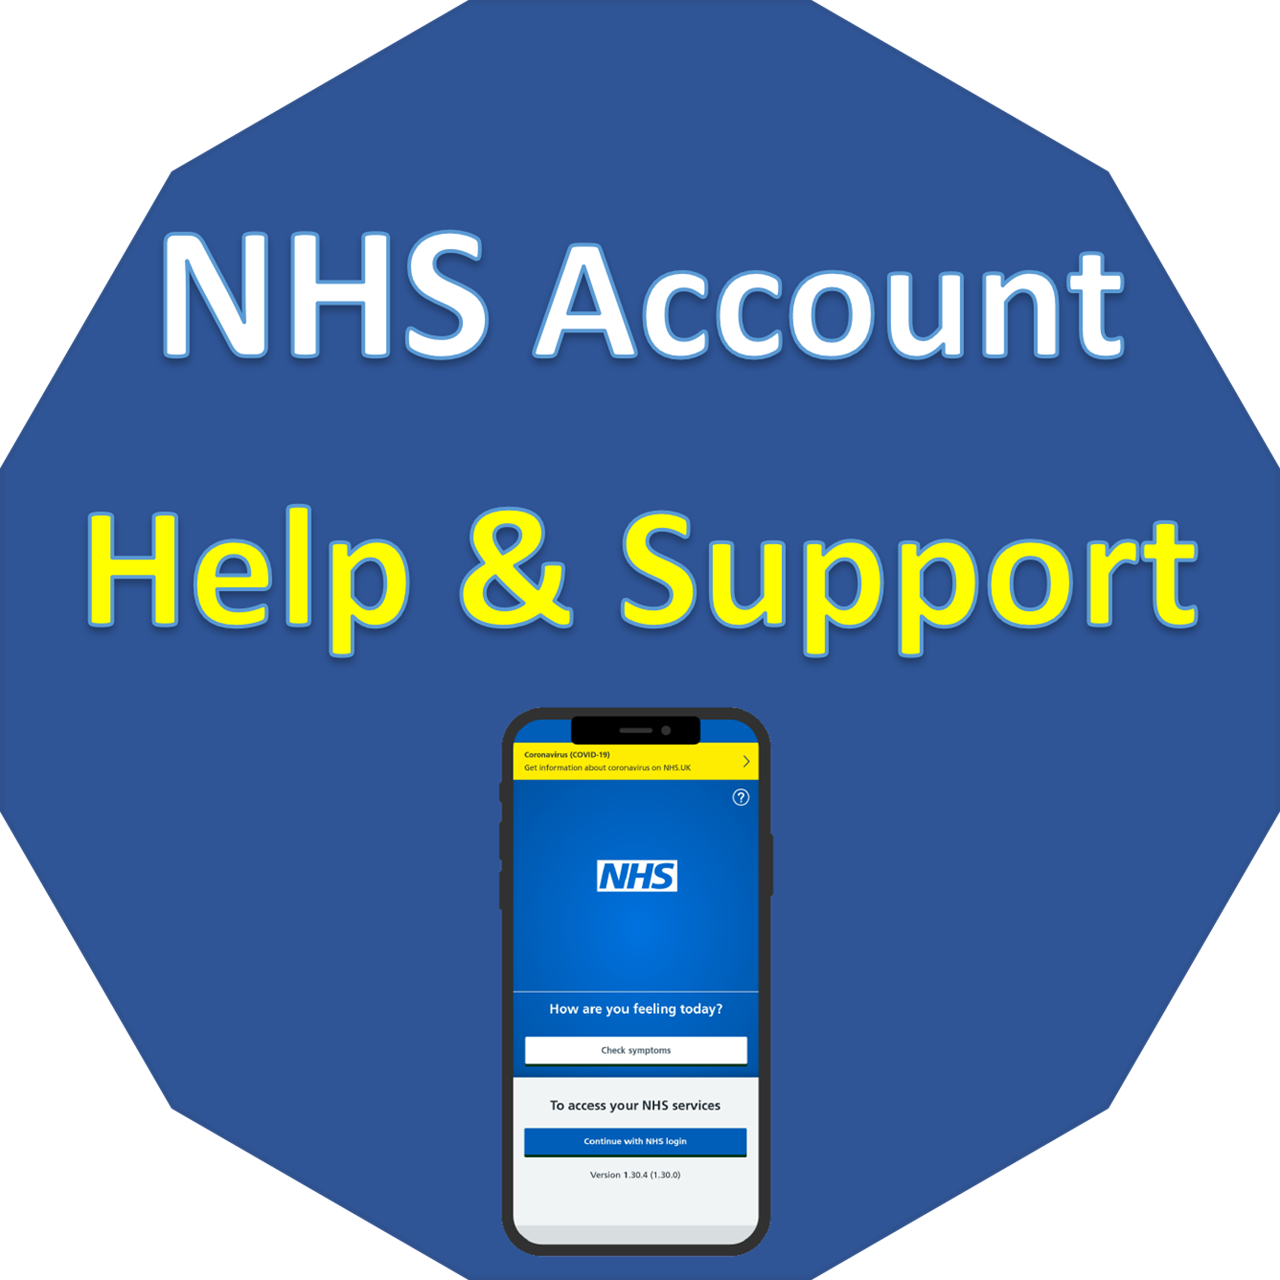 NHS Account Help & Support